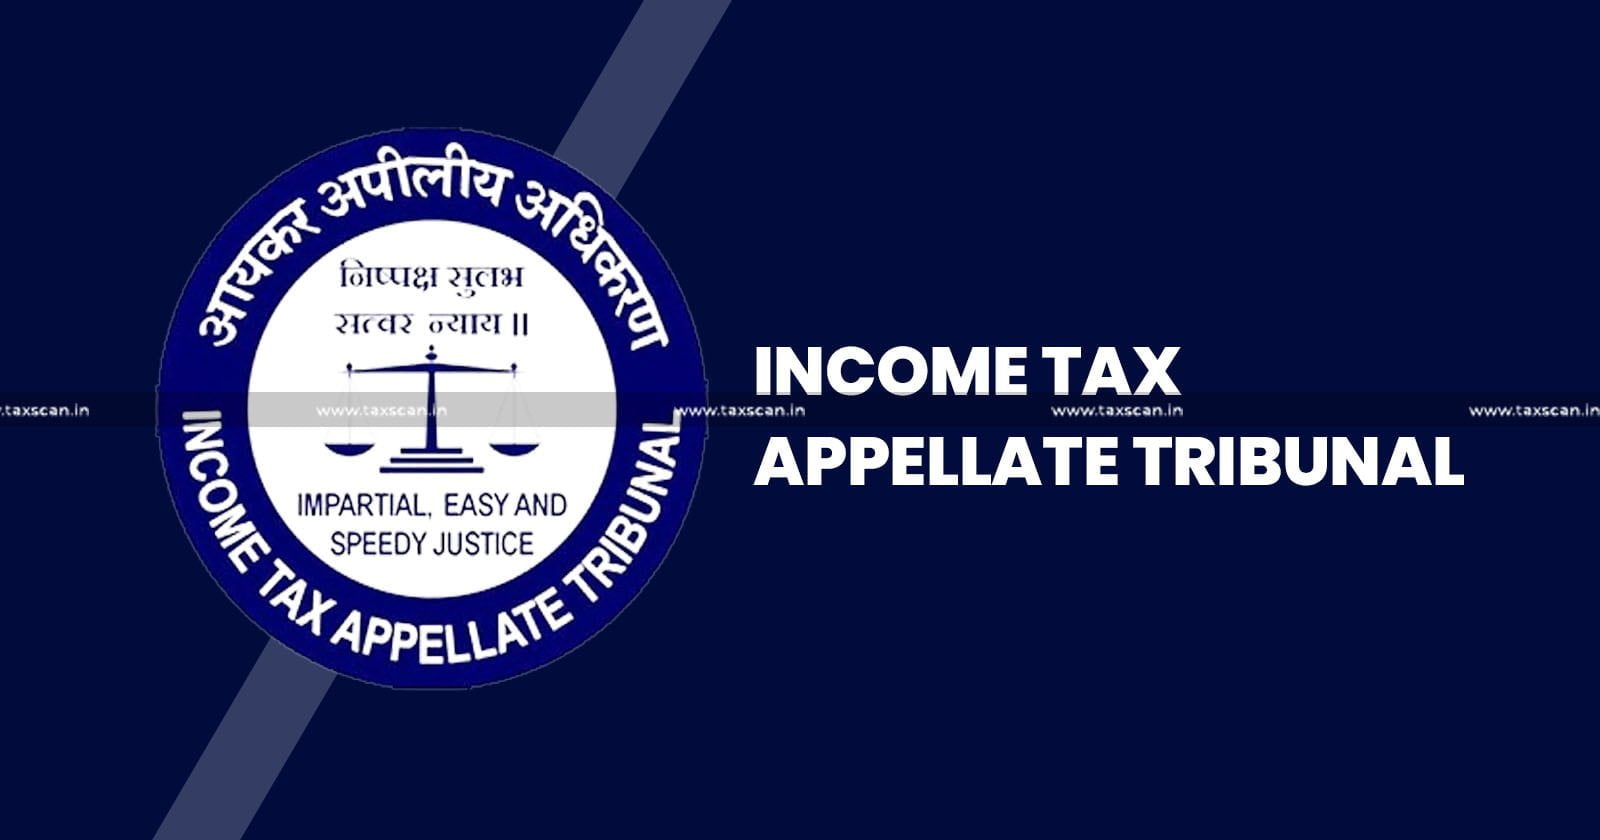 ITAT - late filing fee- IT Act - limitation - Income tax - late fee - income tax act - taxscan